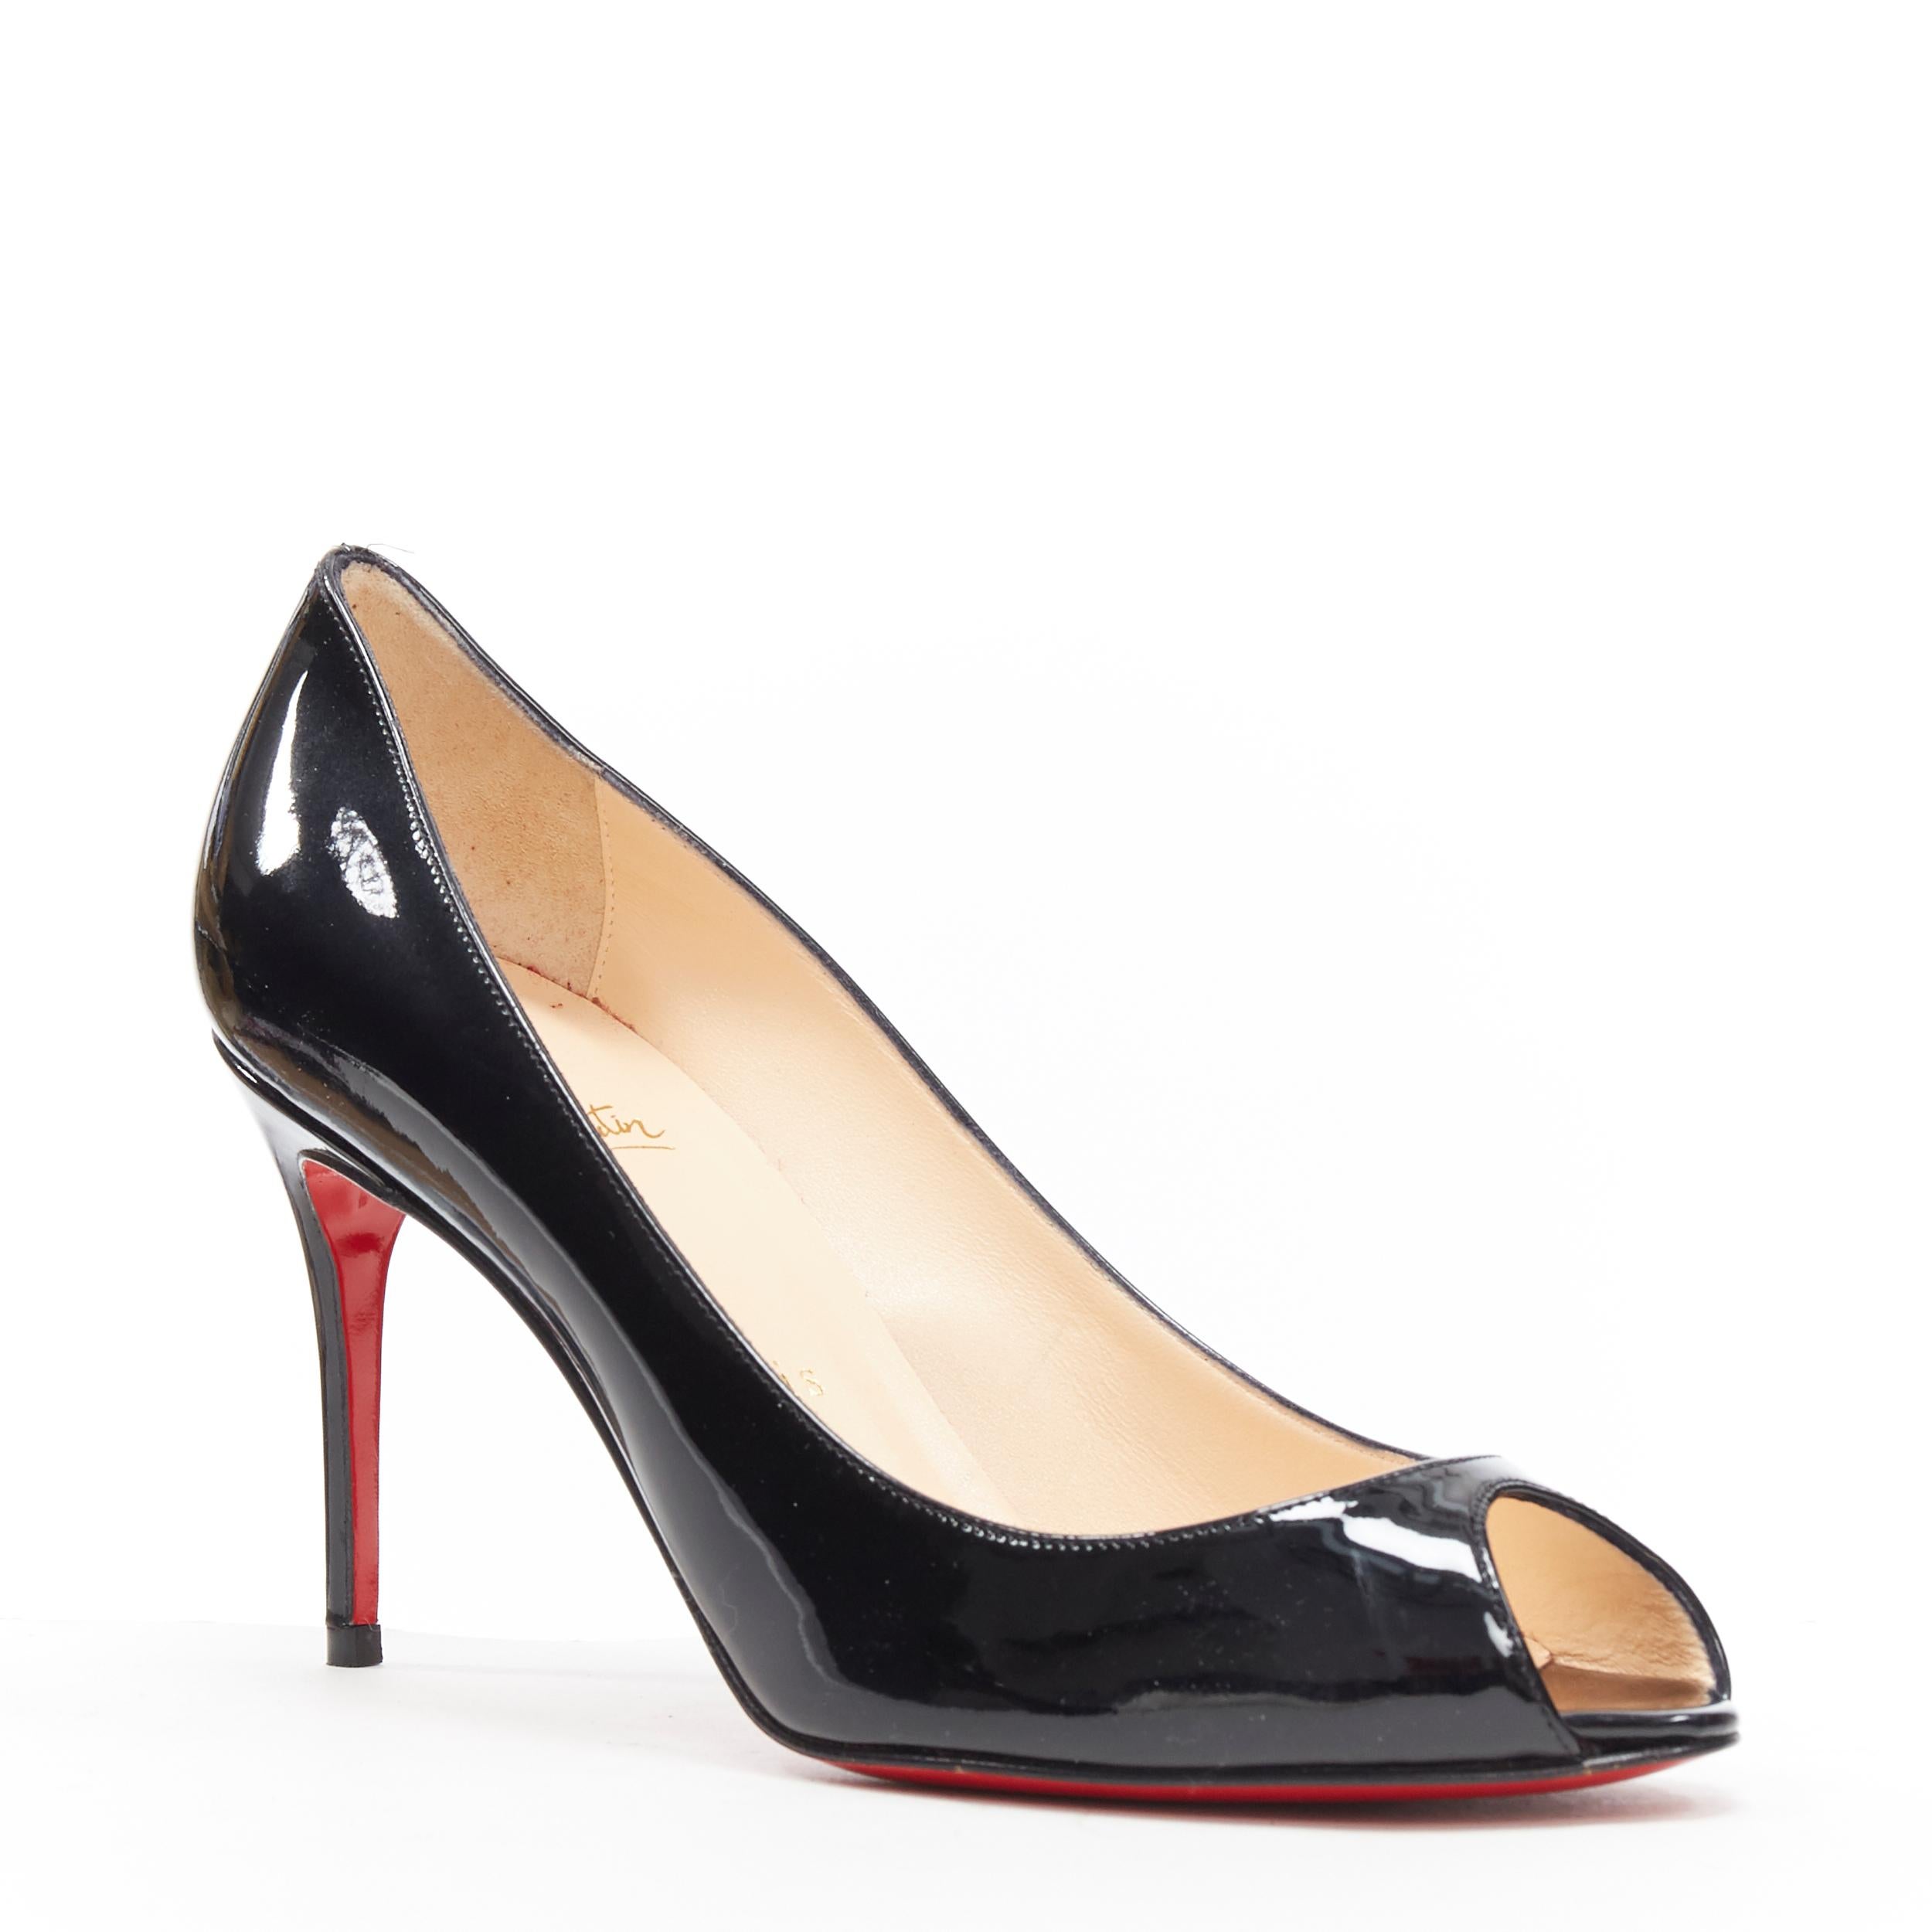 new CHRISTIAN LOUBOUTIN Sexy 85 black patent peep toe slim mid heel pump EU38
Brand: Christian Louboutin
Designer: Christian Louboutin
Model Name / Style: Sexy 85
Material: Leather
Color: Black
Pattern: Solid
Closure: Slip on
Extra Detail: High